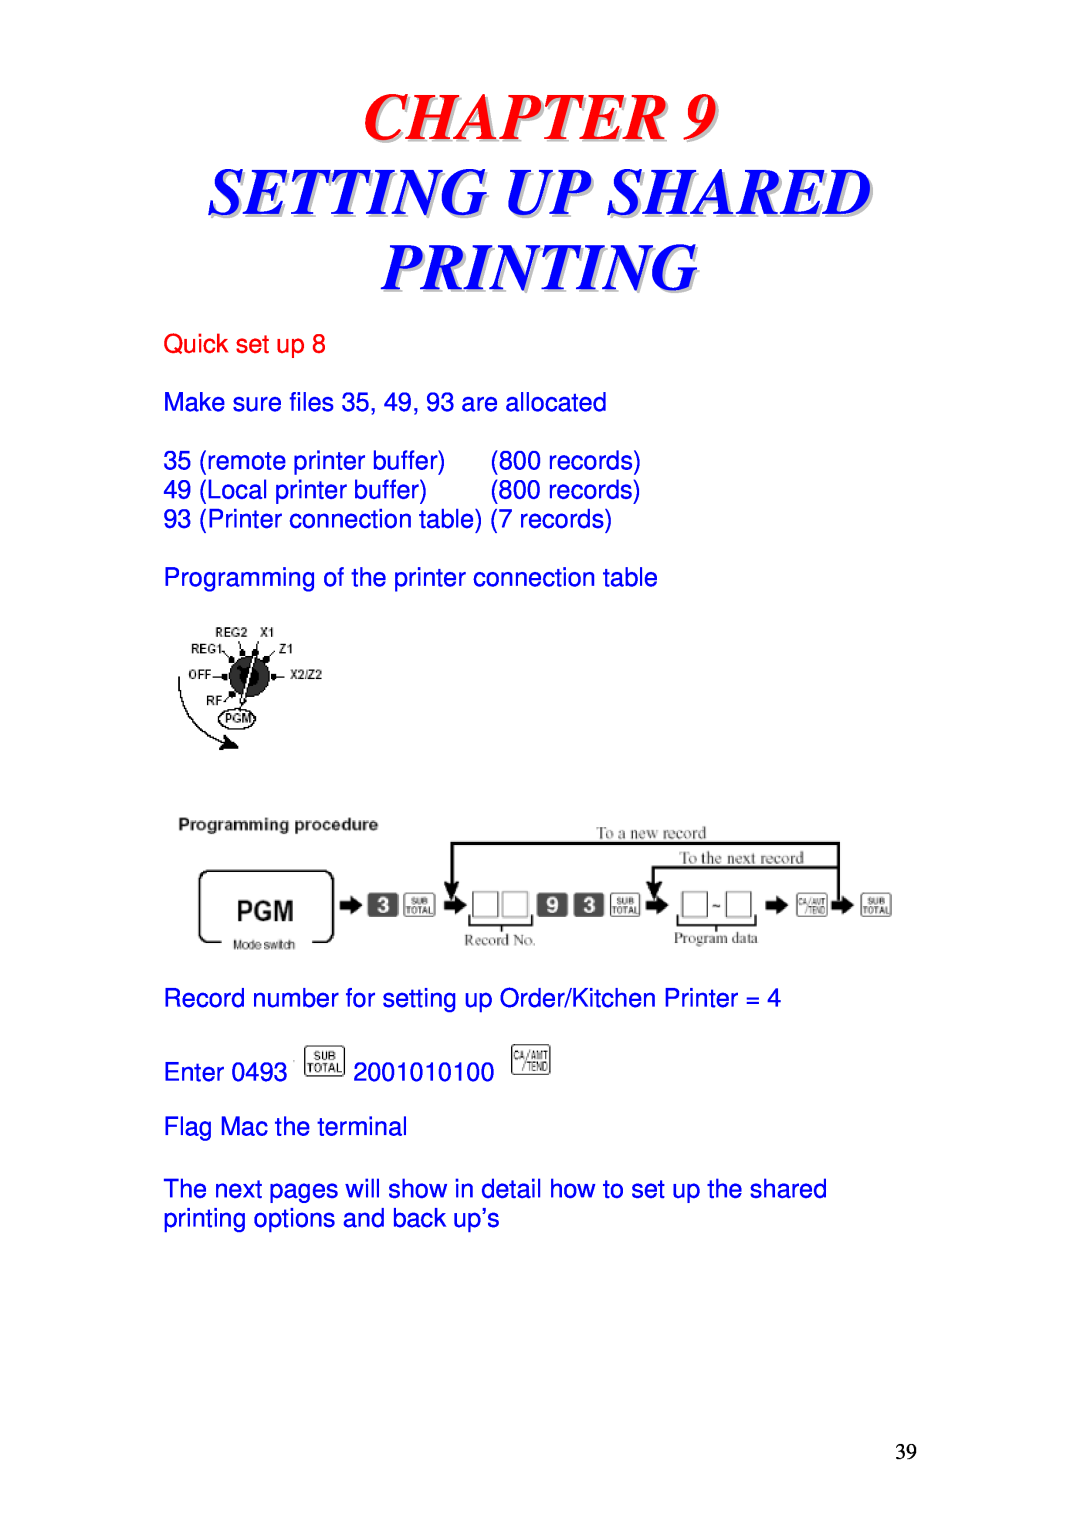 Delta TE-4000 manual Setting Up Shared Printing, Make sure files 35, 49, 93 are allocated, remote printer buffer, Chapter 